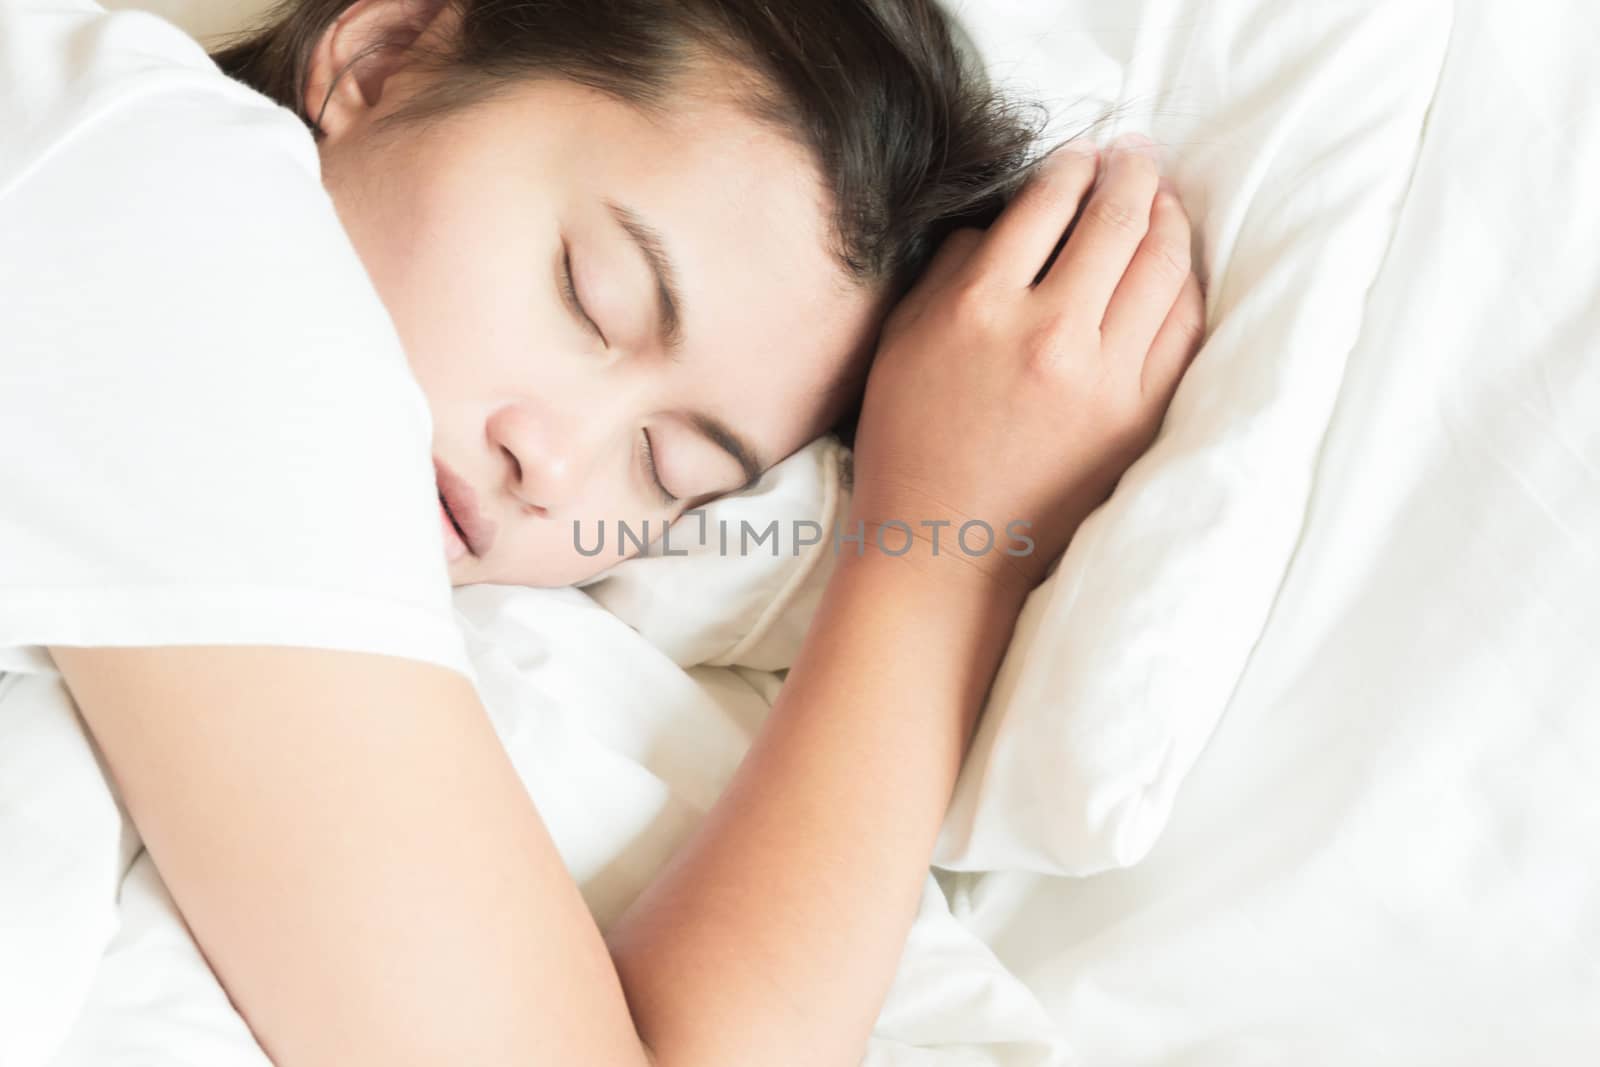 Closeup young woman sleeping with happy face in the bed, copy space